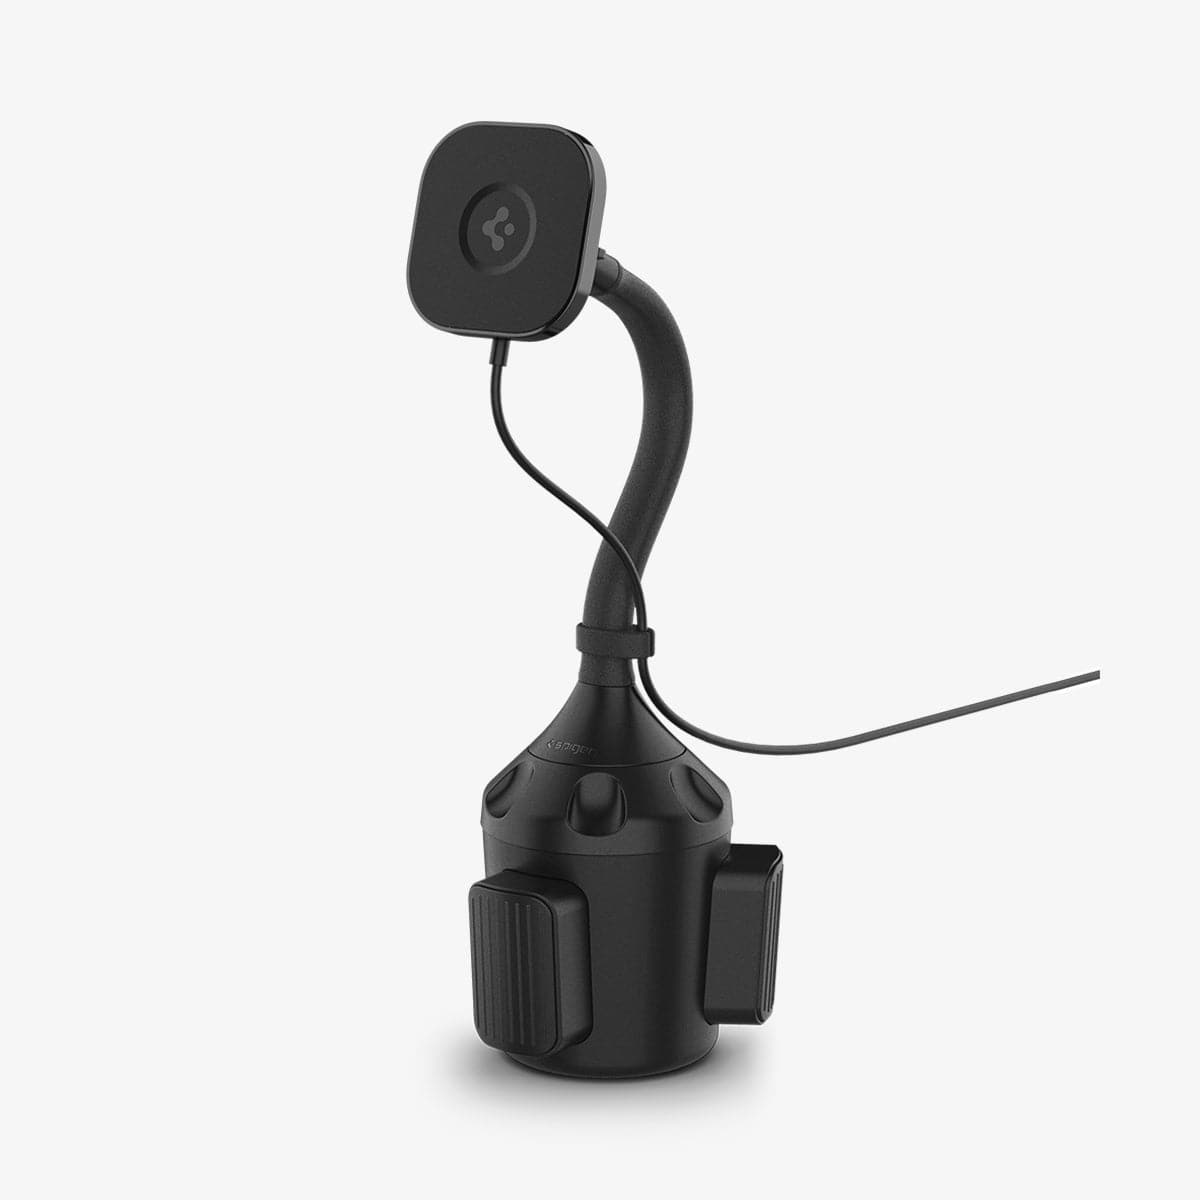 ACP03810 - OneTap Pro Wireless Car Mount Cup Holder (MagFit) in black showing the front and side